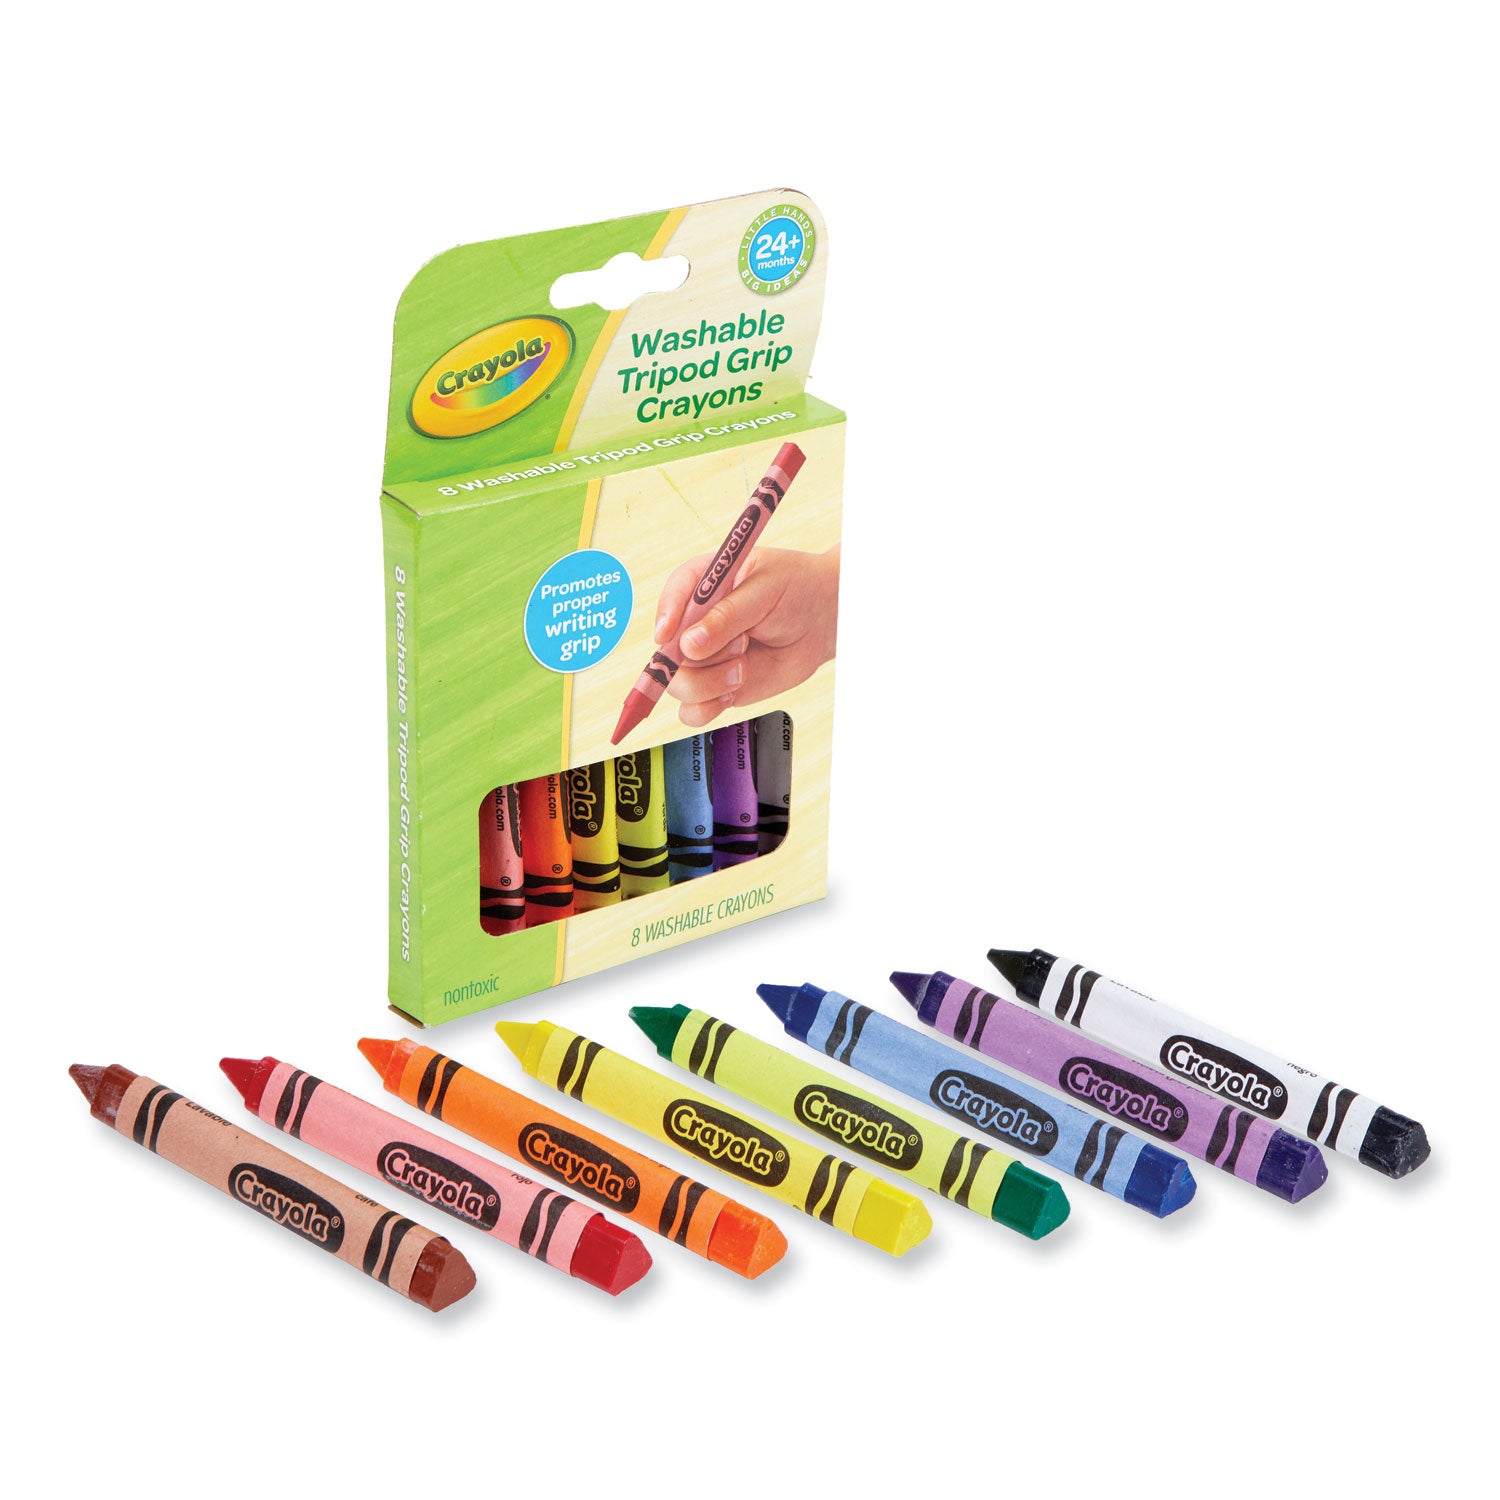 washable-tripod-grip-crayons-assorted-colors-8-pack_cyo811460 - 5